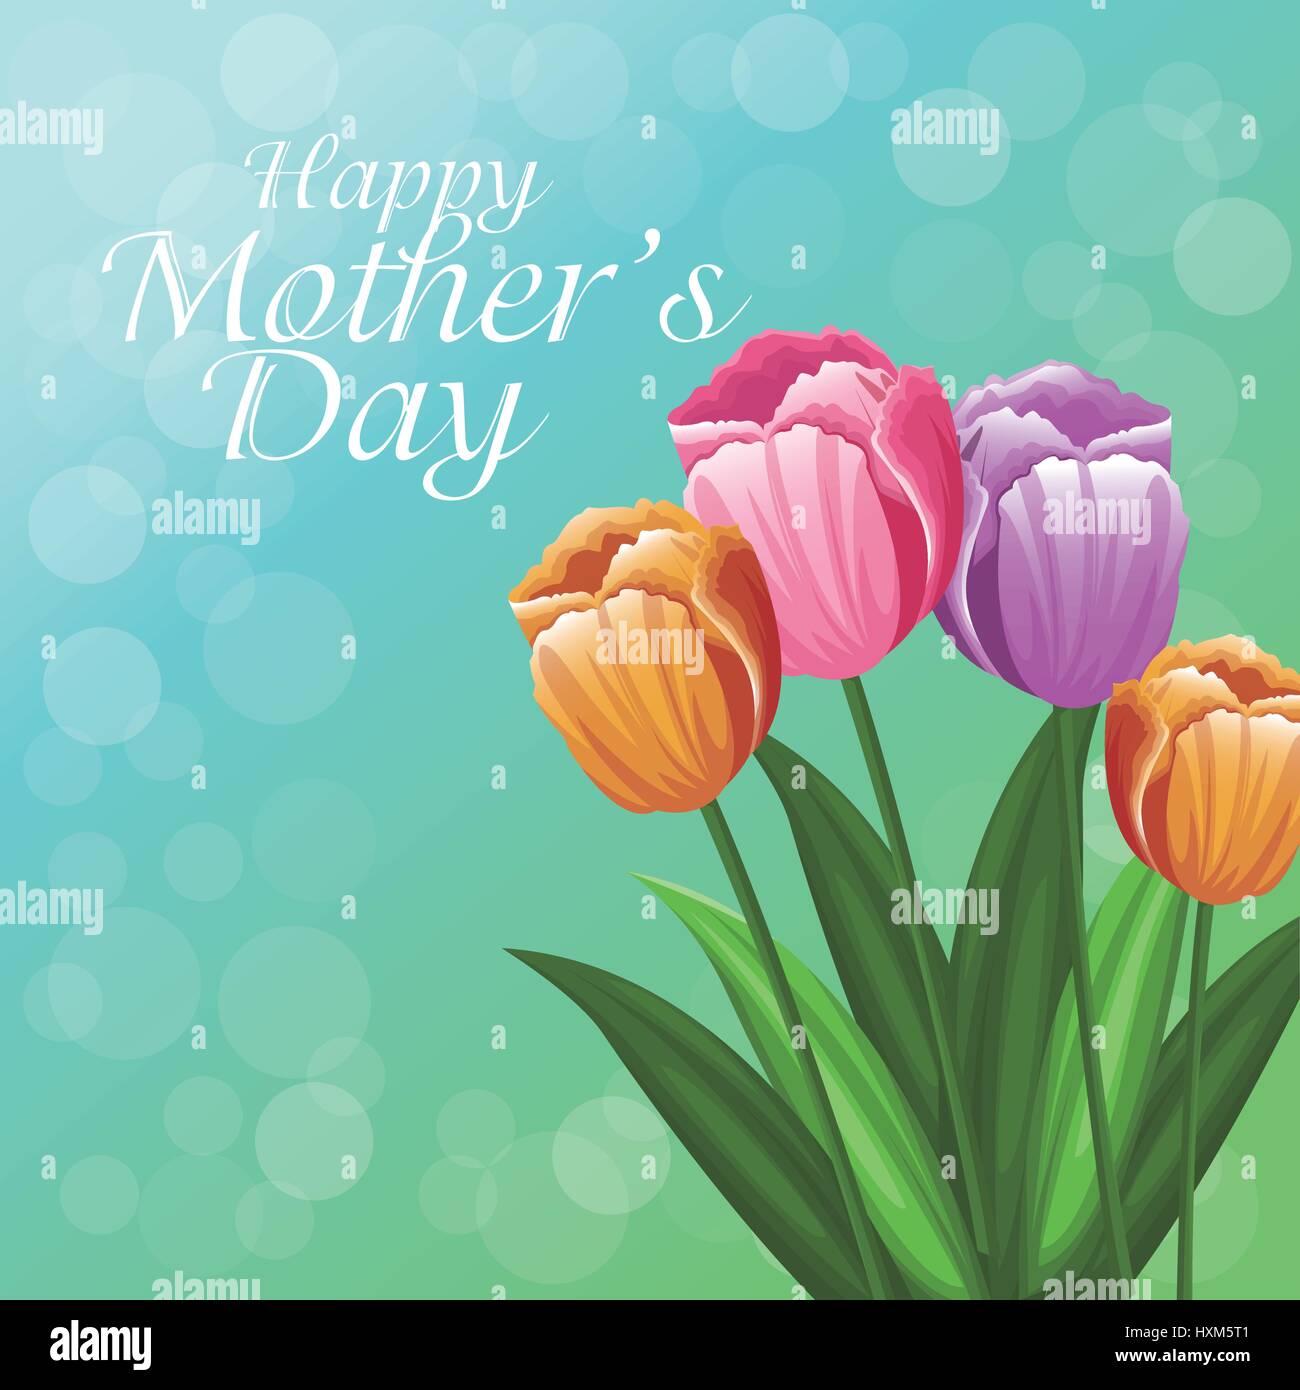 happy mothers day greeting card beautiful flowers Stock Vector ...